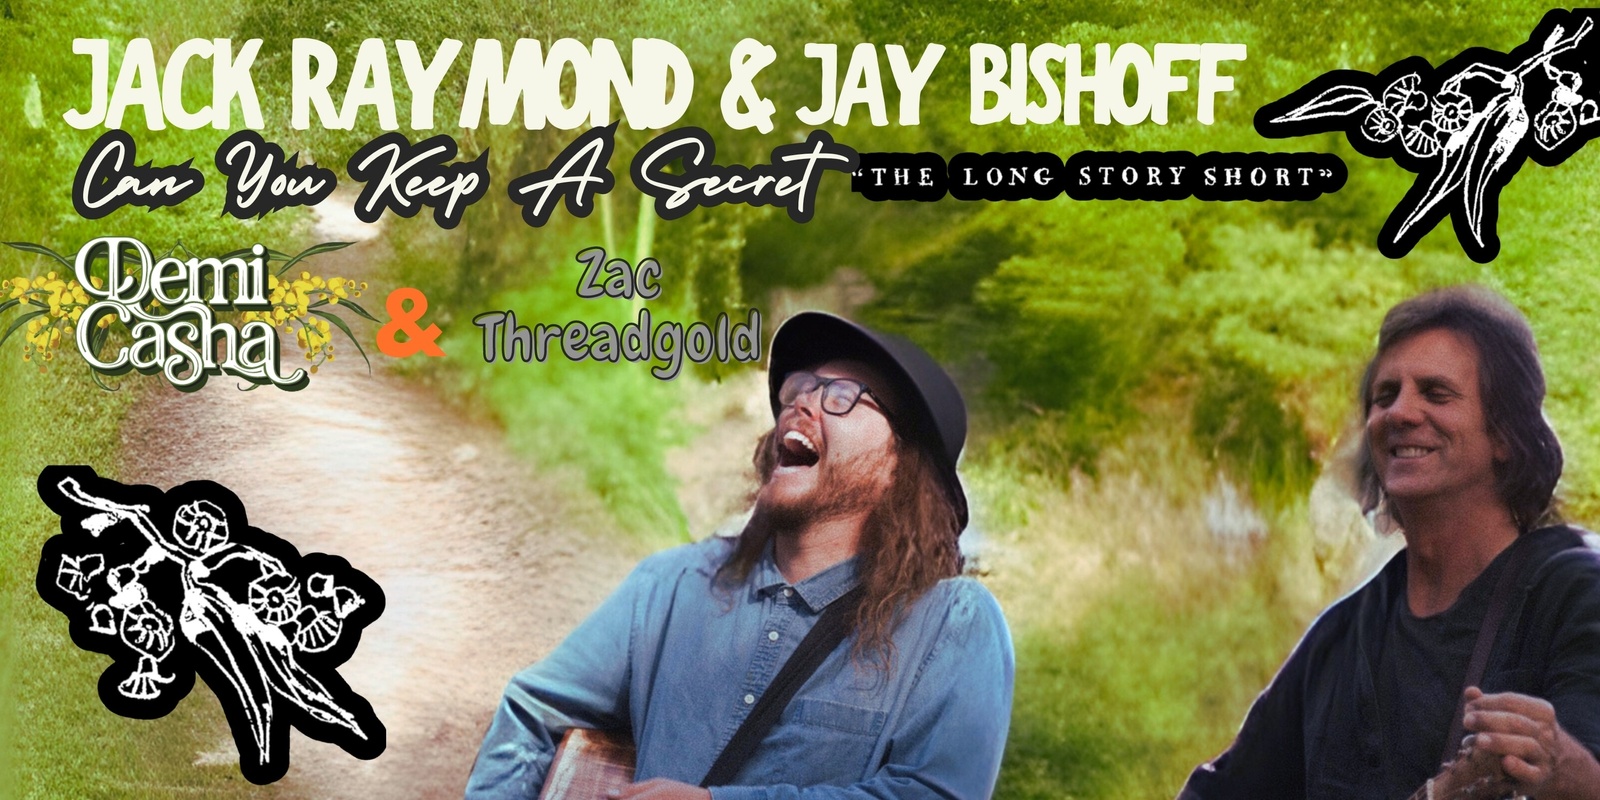 Banner image for Jack Raymond & Jay Bishoff “The Long Story Short”